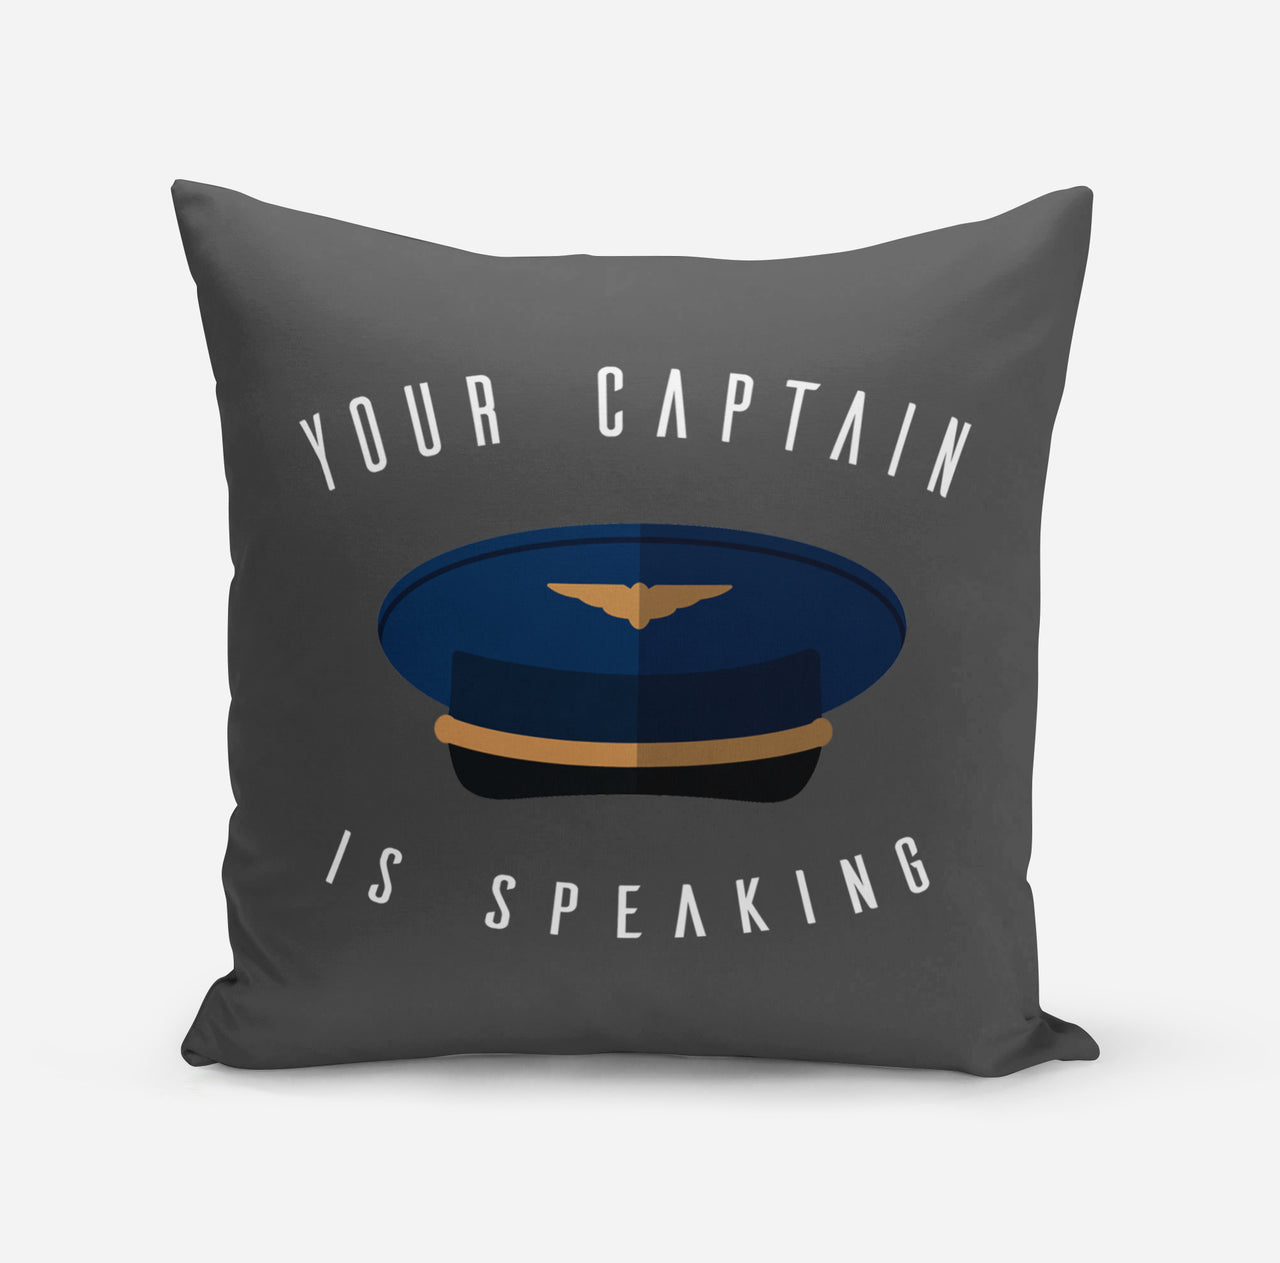 Your Captain Is Speaking Designed Pillows